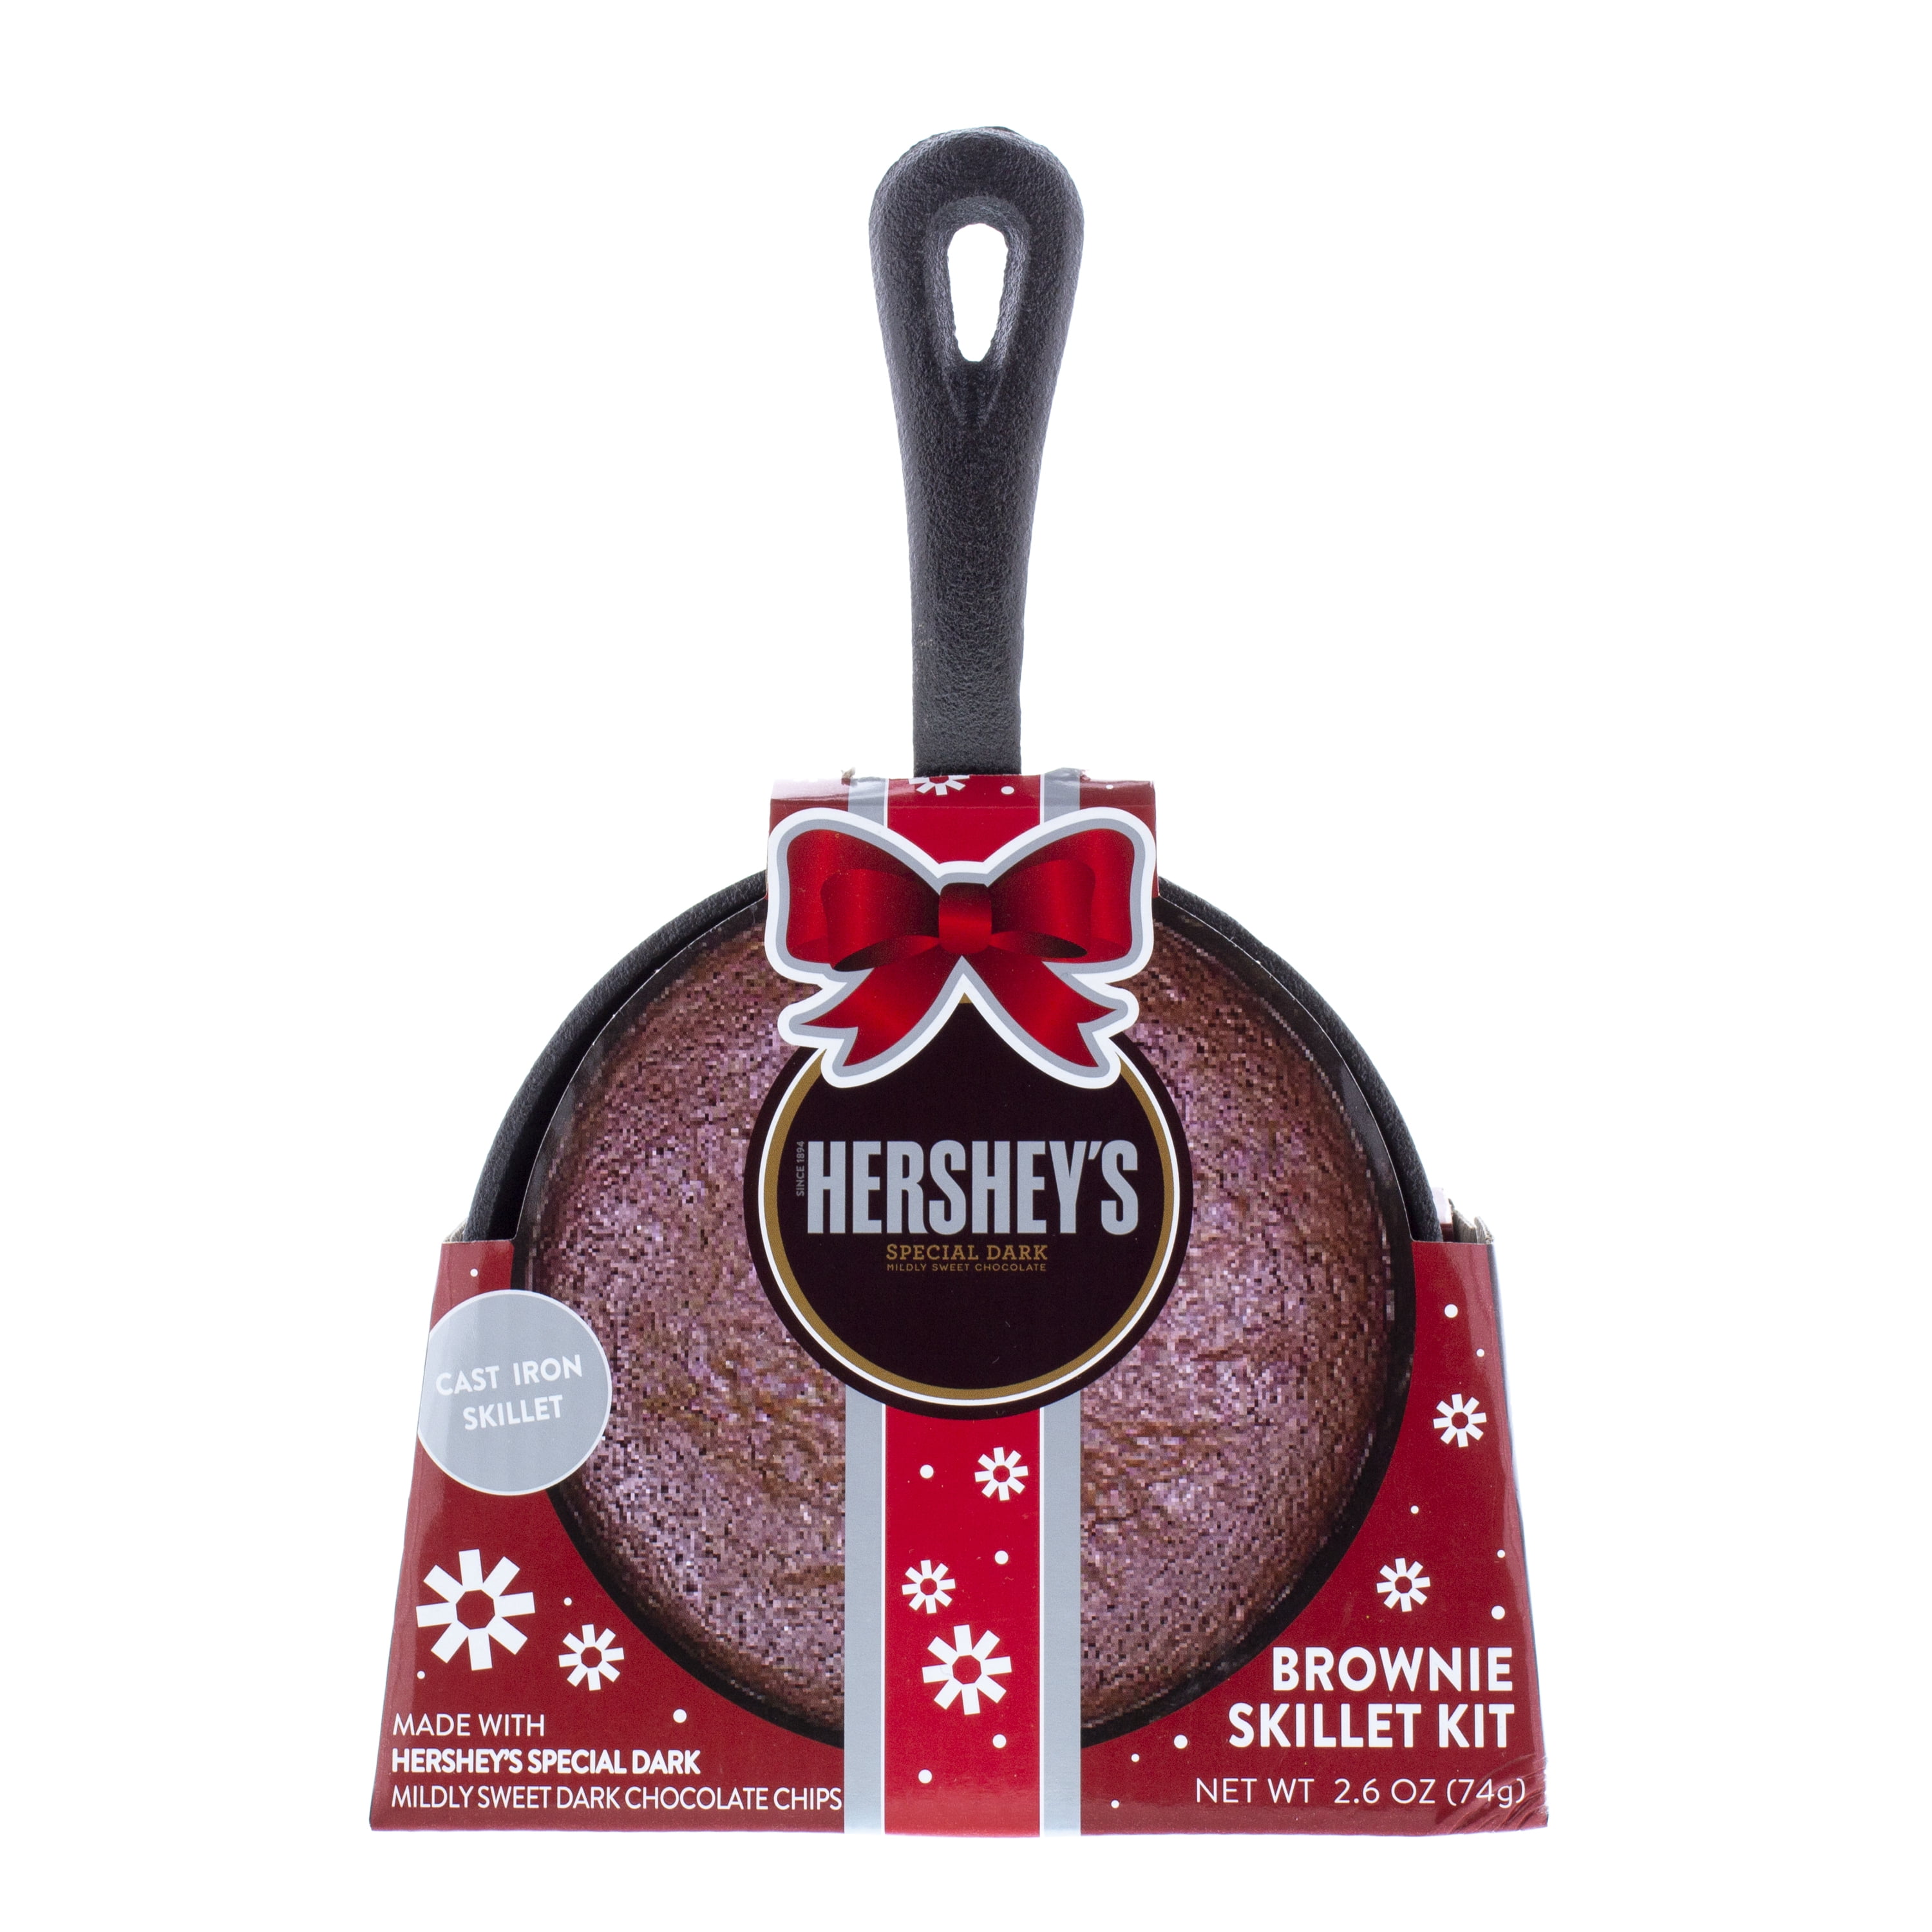 Cast Iron Skillet Brownie Baking Gift Set,Incl Mini Cast Iron Pan and  Chocolate Brownie Mix, 1 EACH - Ralphs